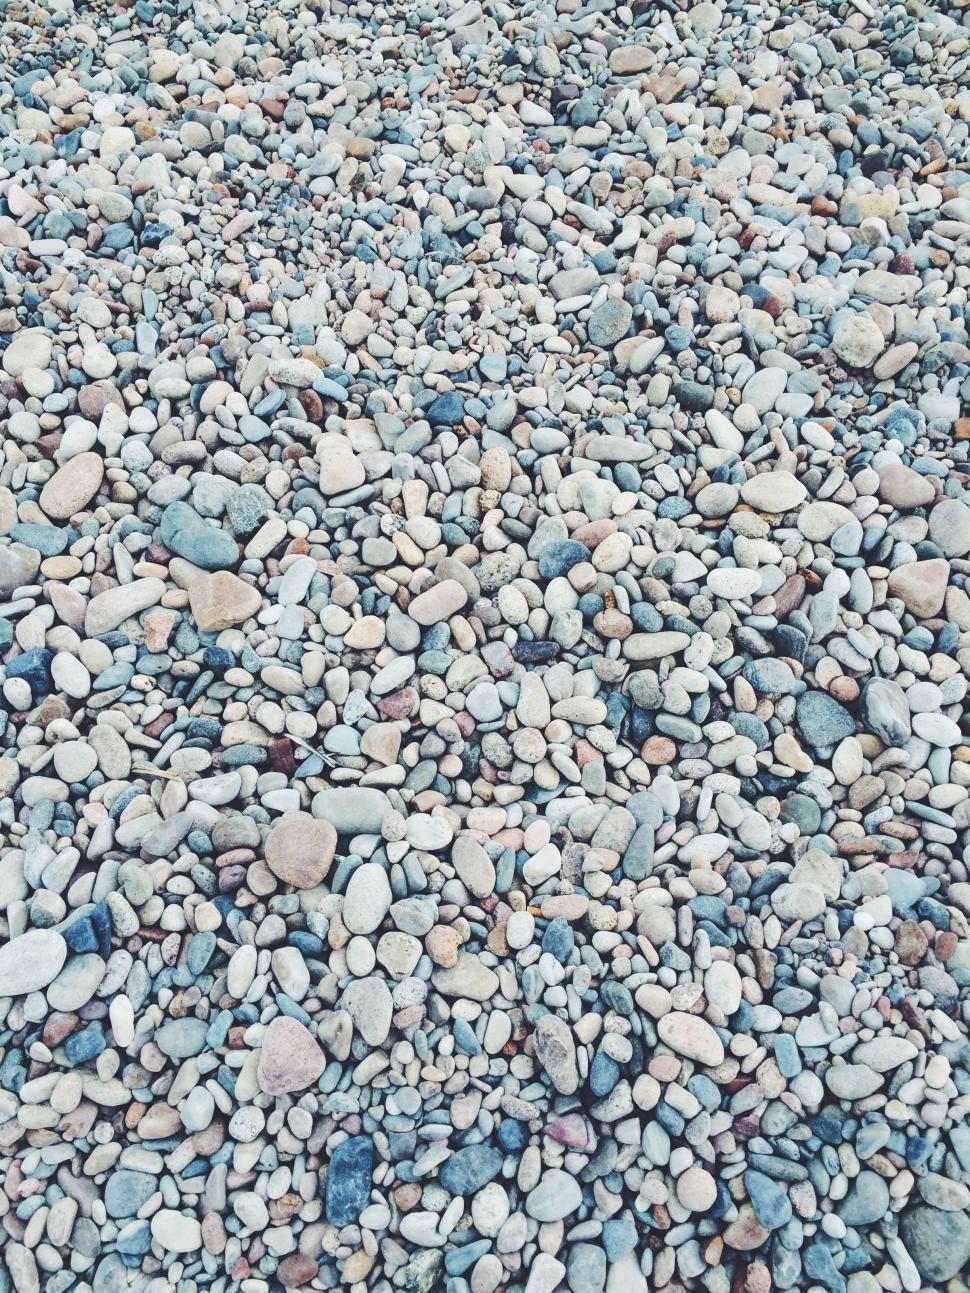 Free Image of Pile of Rocks on the Ground 